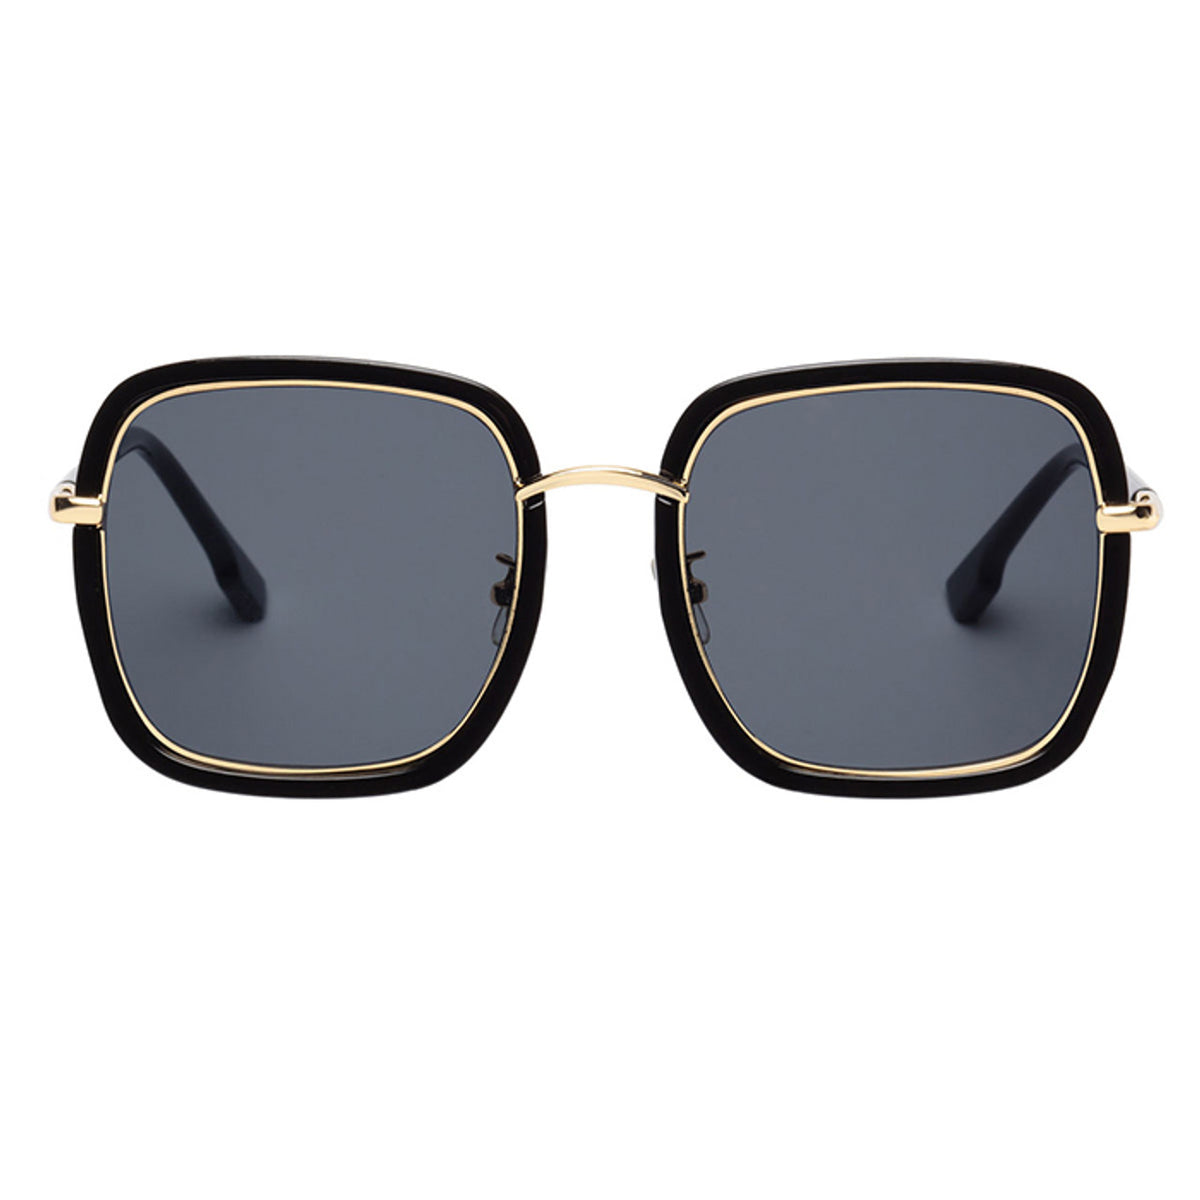 Elie Beaumont - EBS7016 Black and Gold Sunglasses